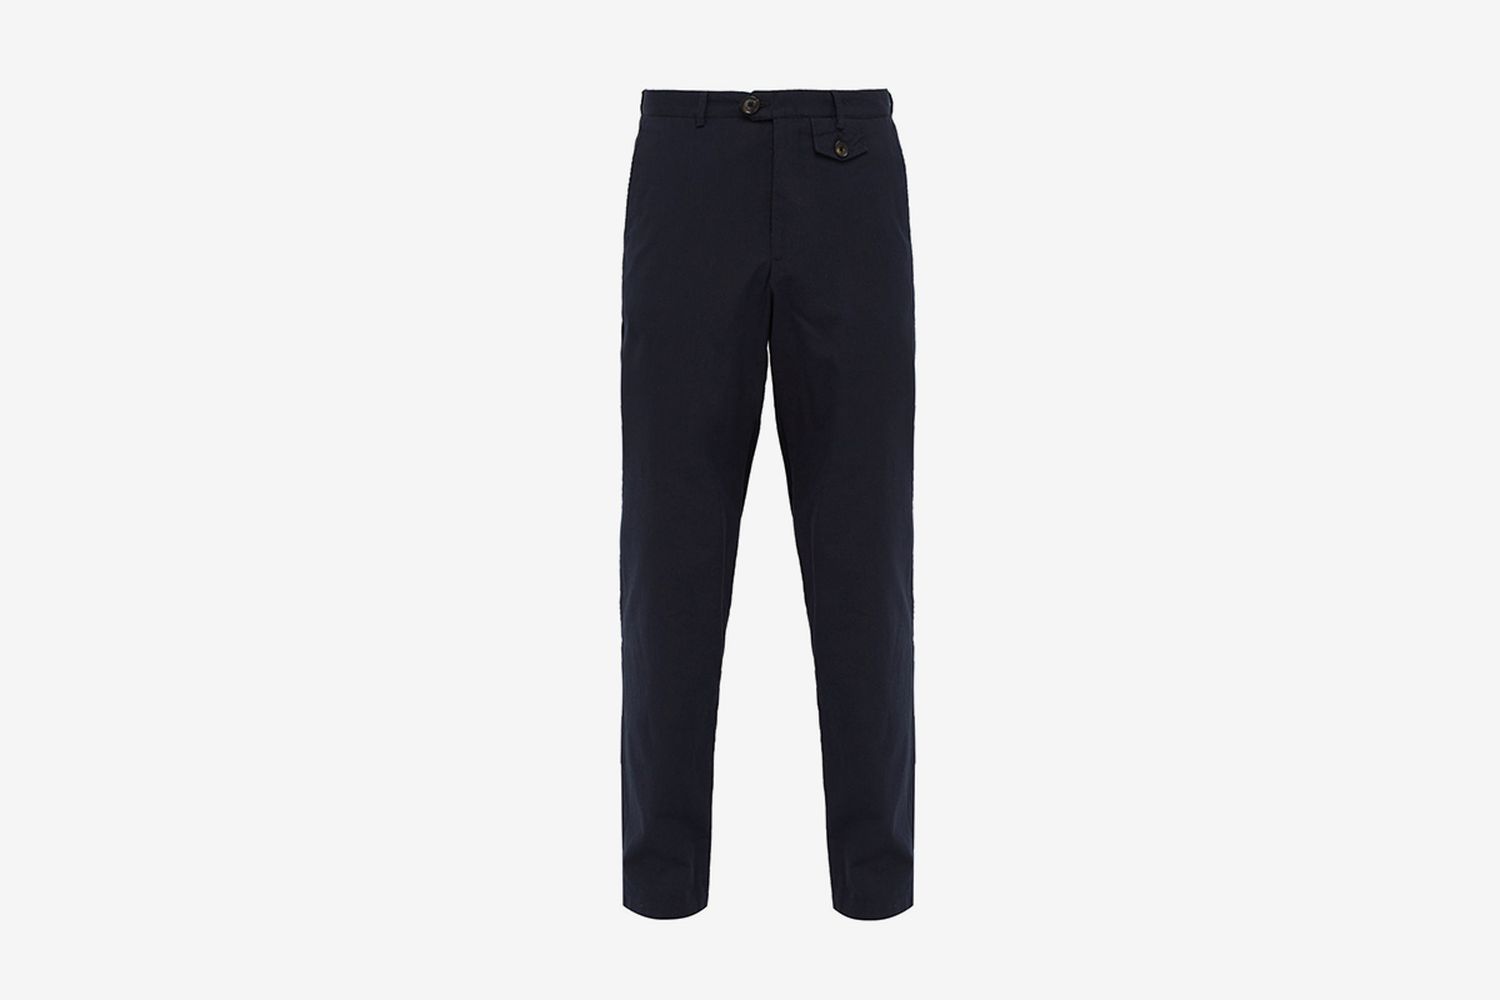 Theobald Ribbed Cotton Trousers